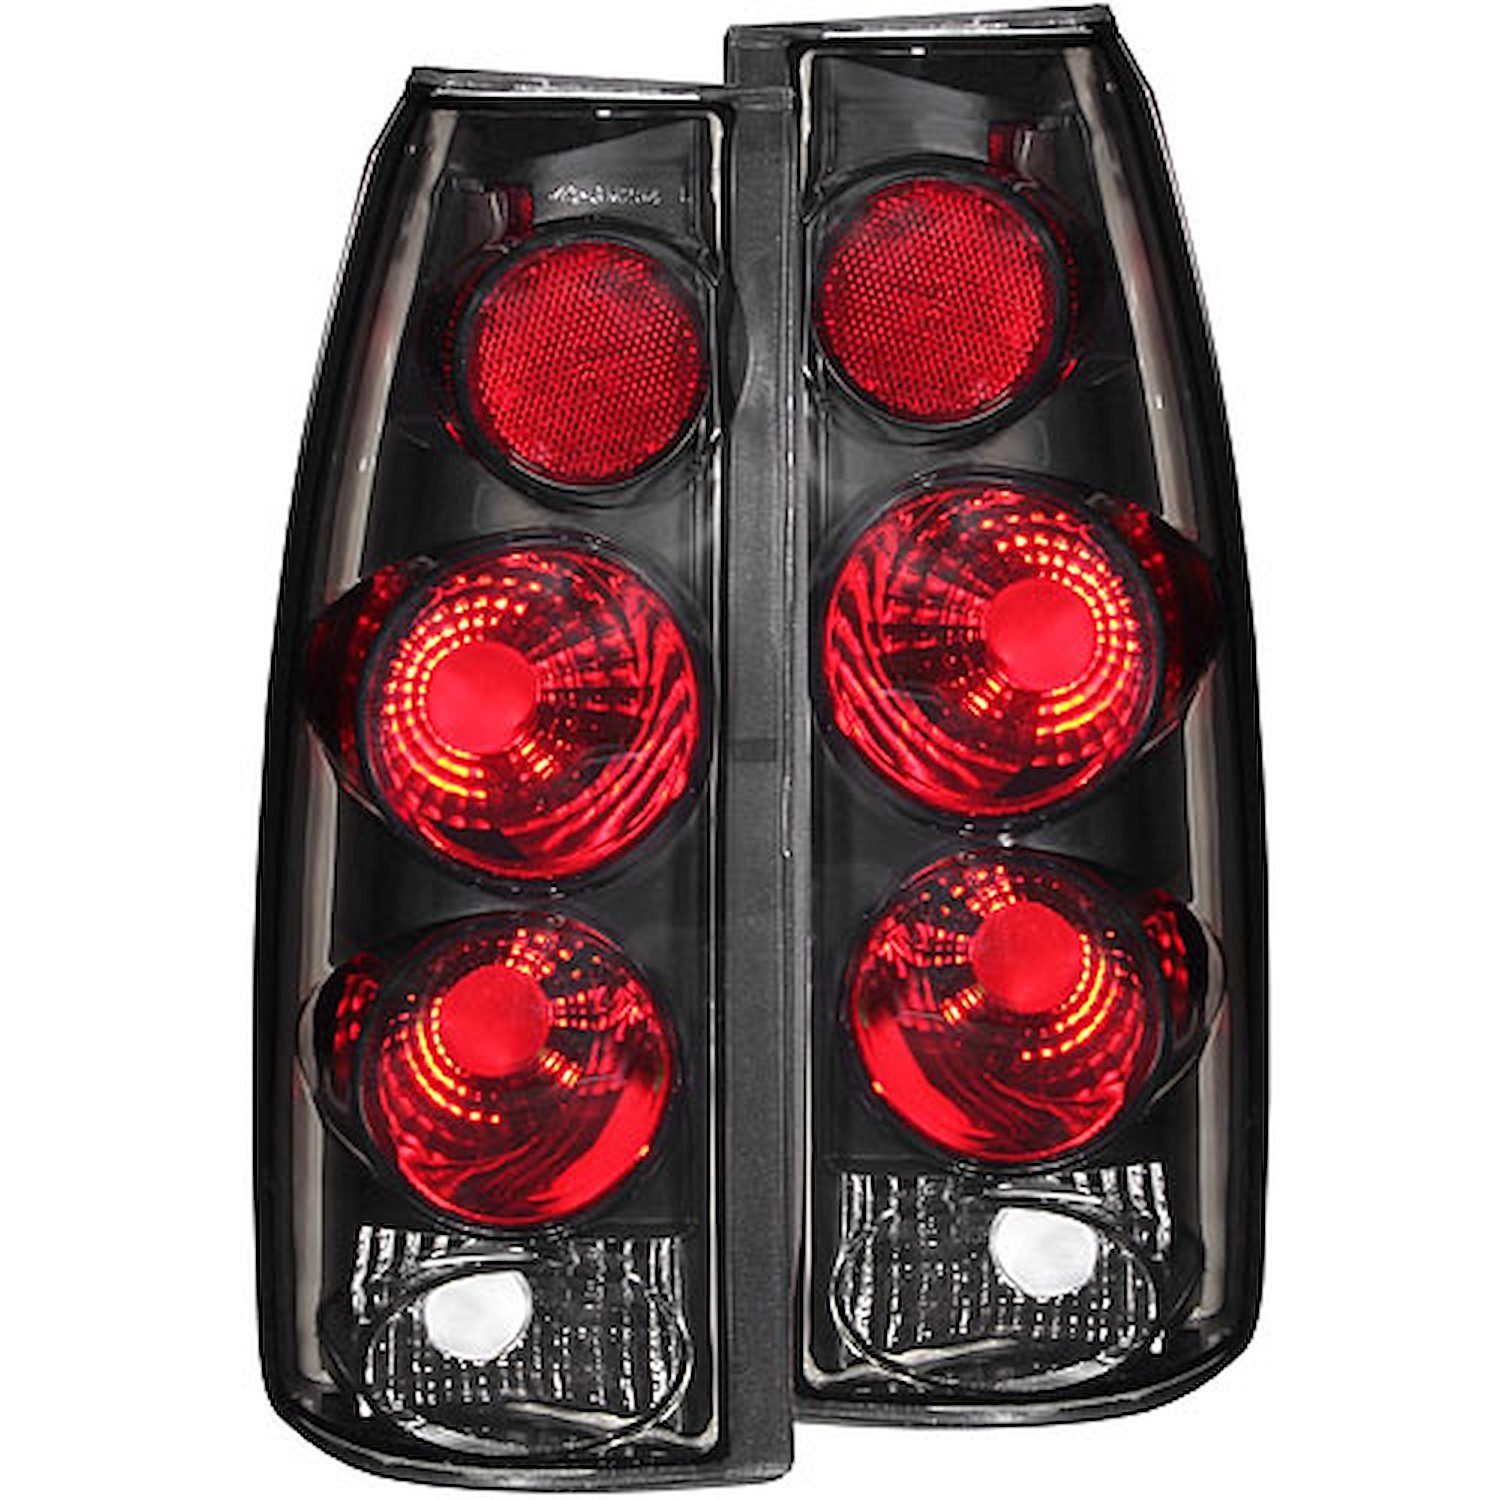 1988-98 Chevy/GMC Full Size Truck/SUV Taillights